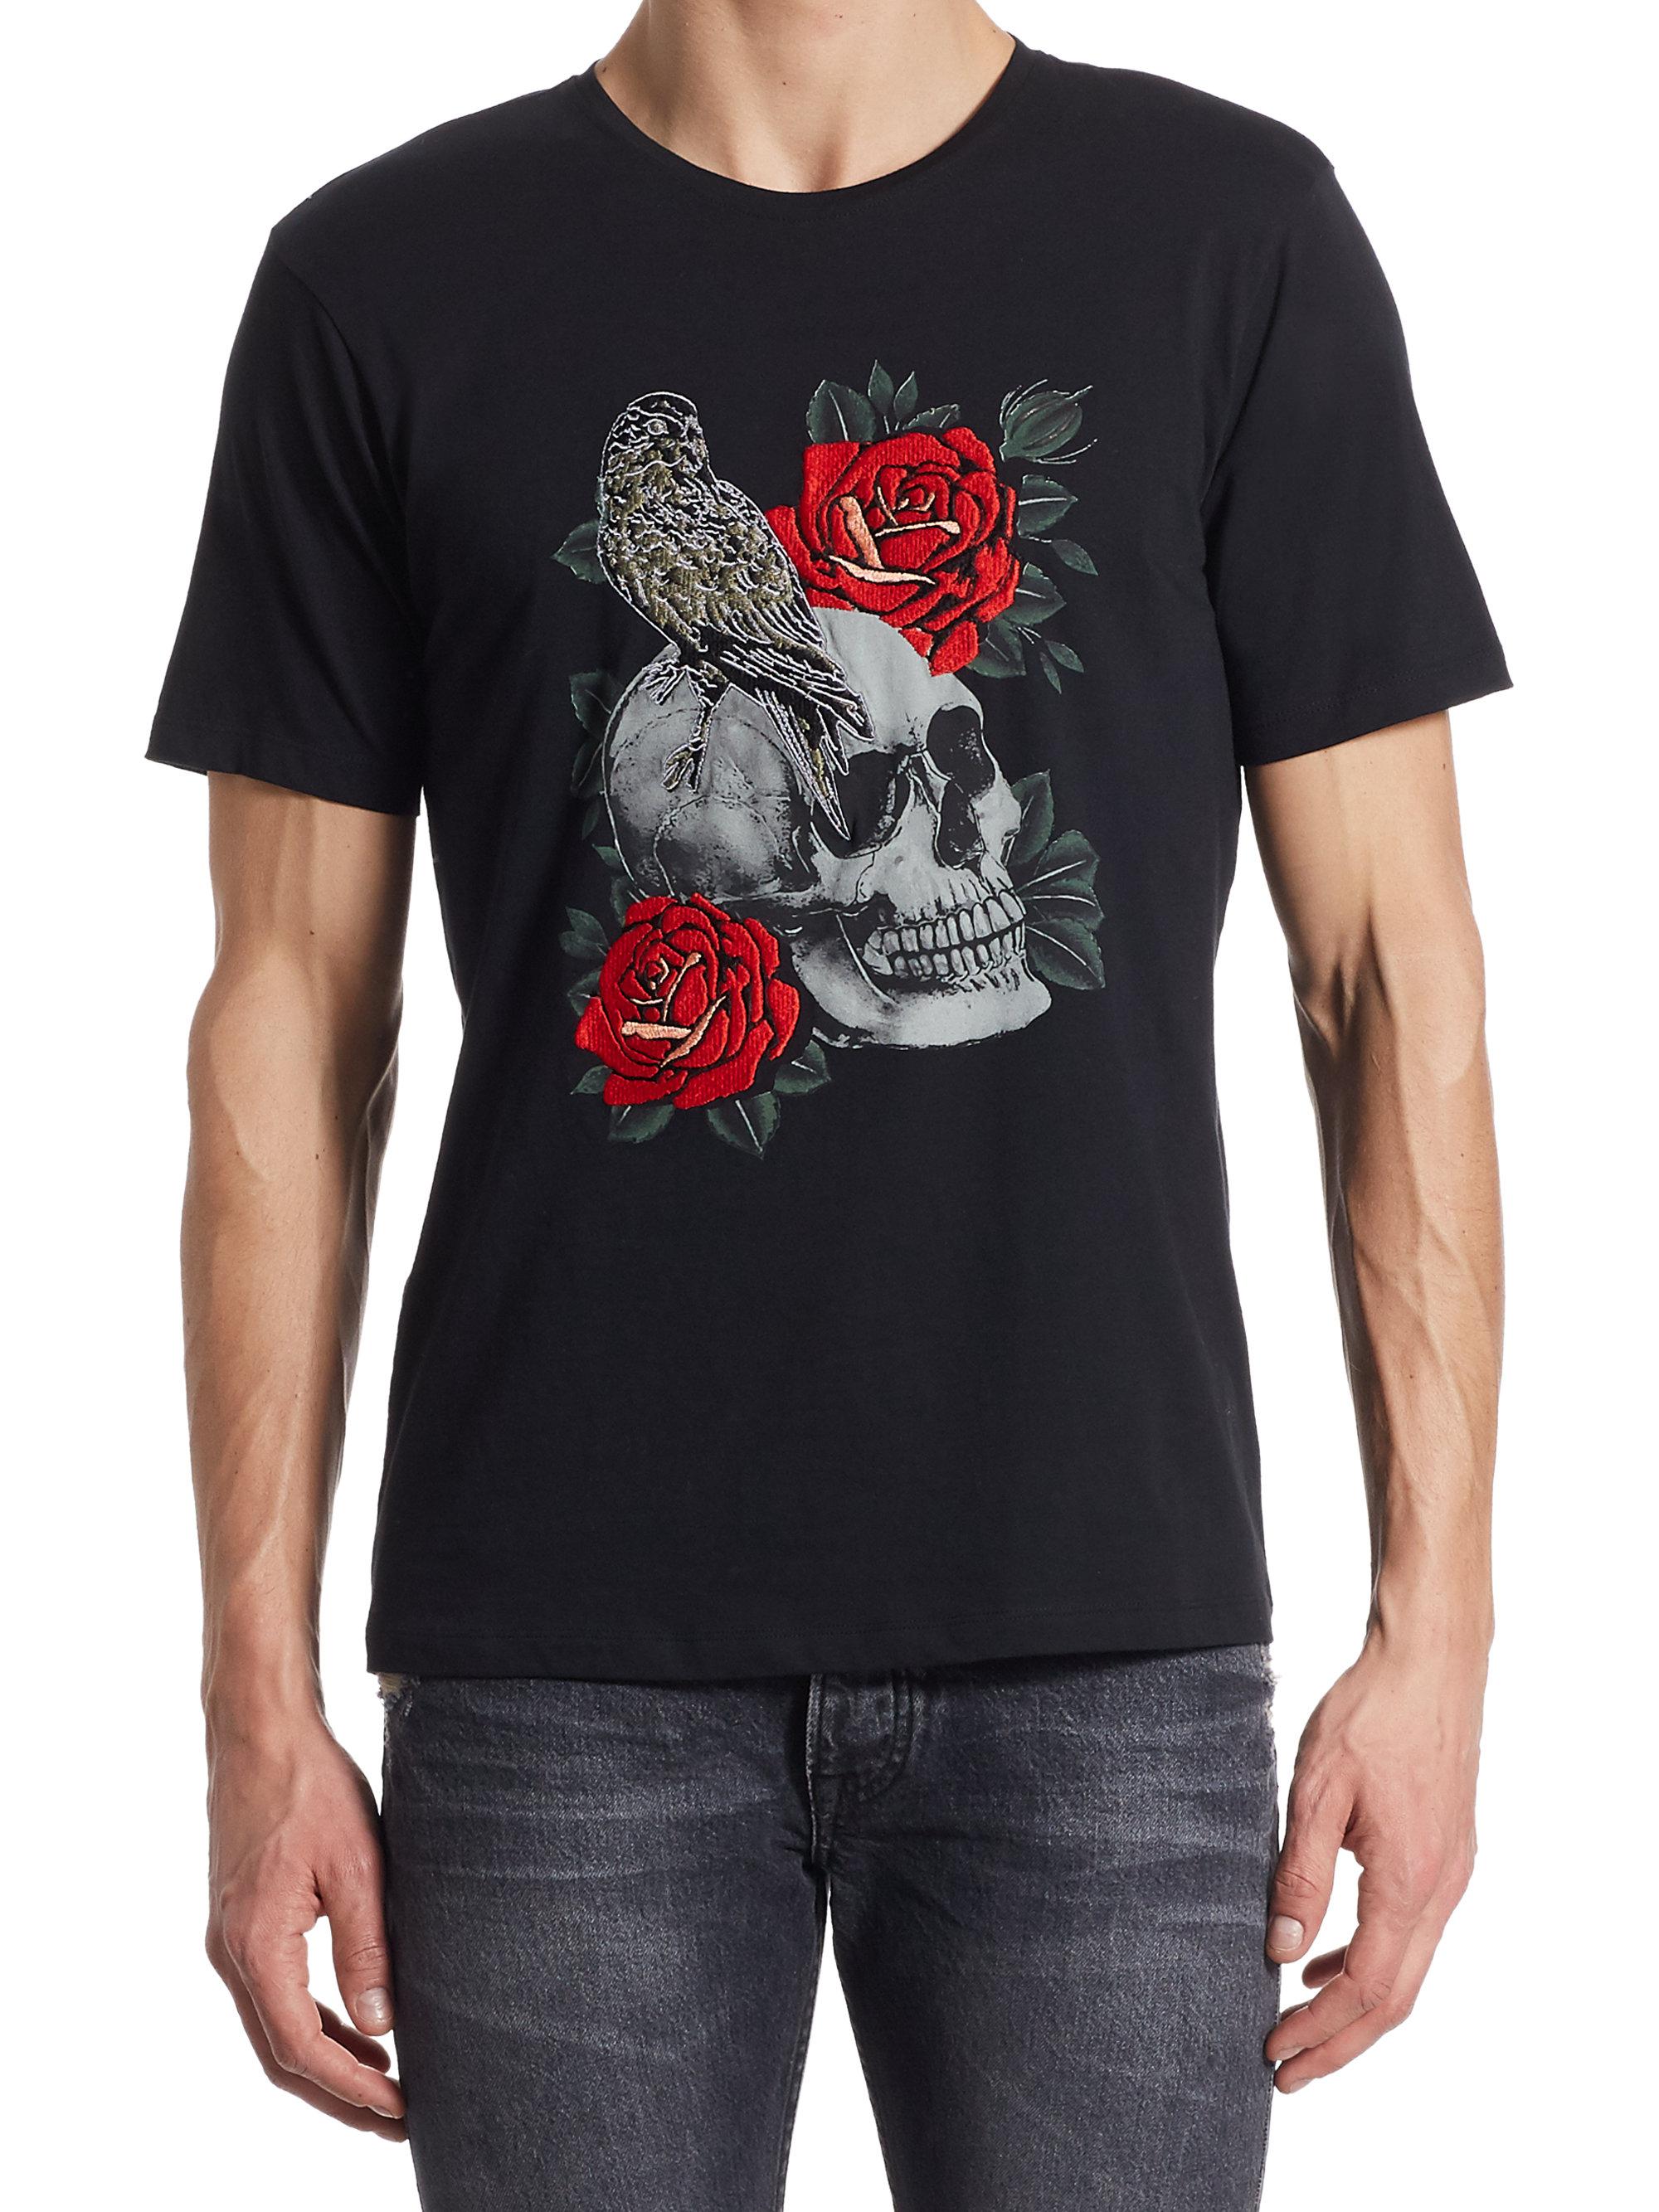 Lyst - The Kooples Skull And Embroidered Rose T-shirt in Black for Men